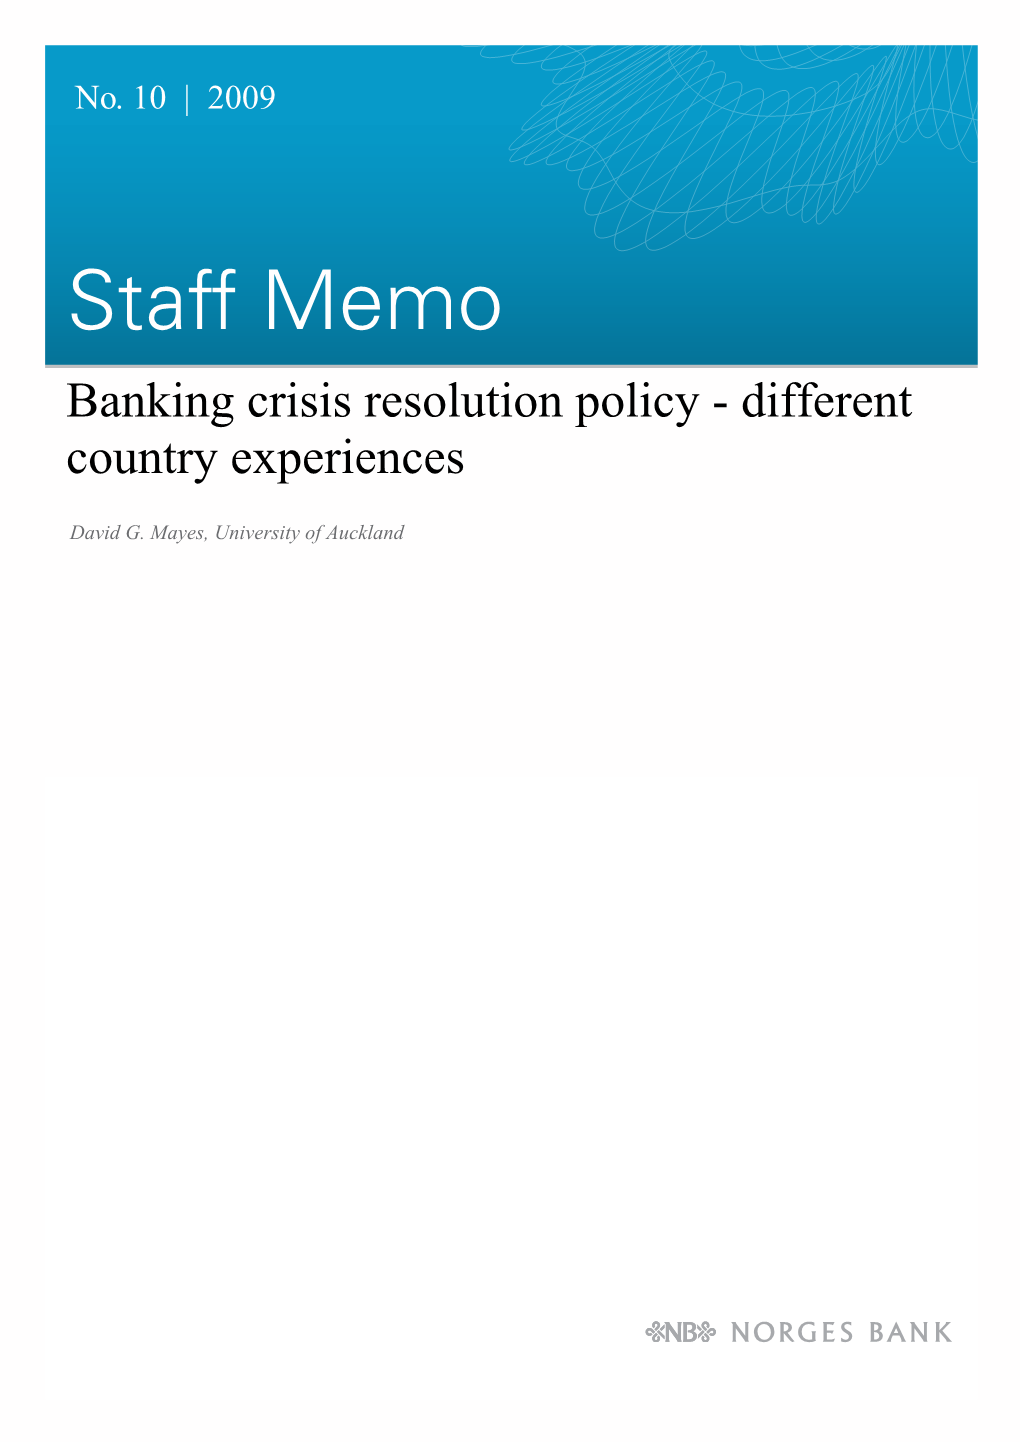 Banking Crisis Resolution Policy - Different Country Experiences